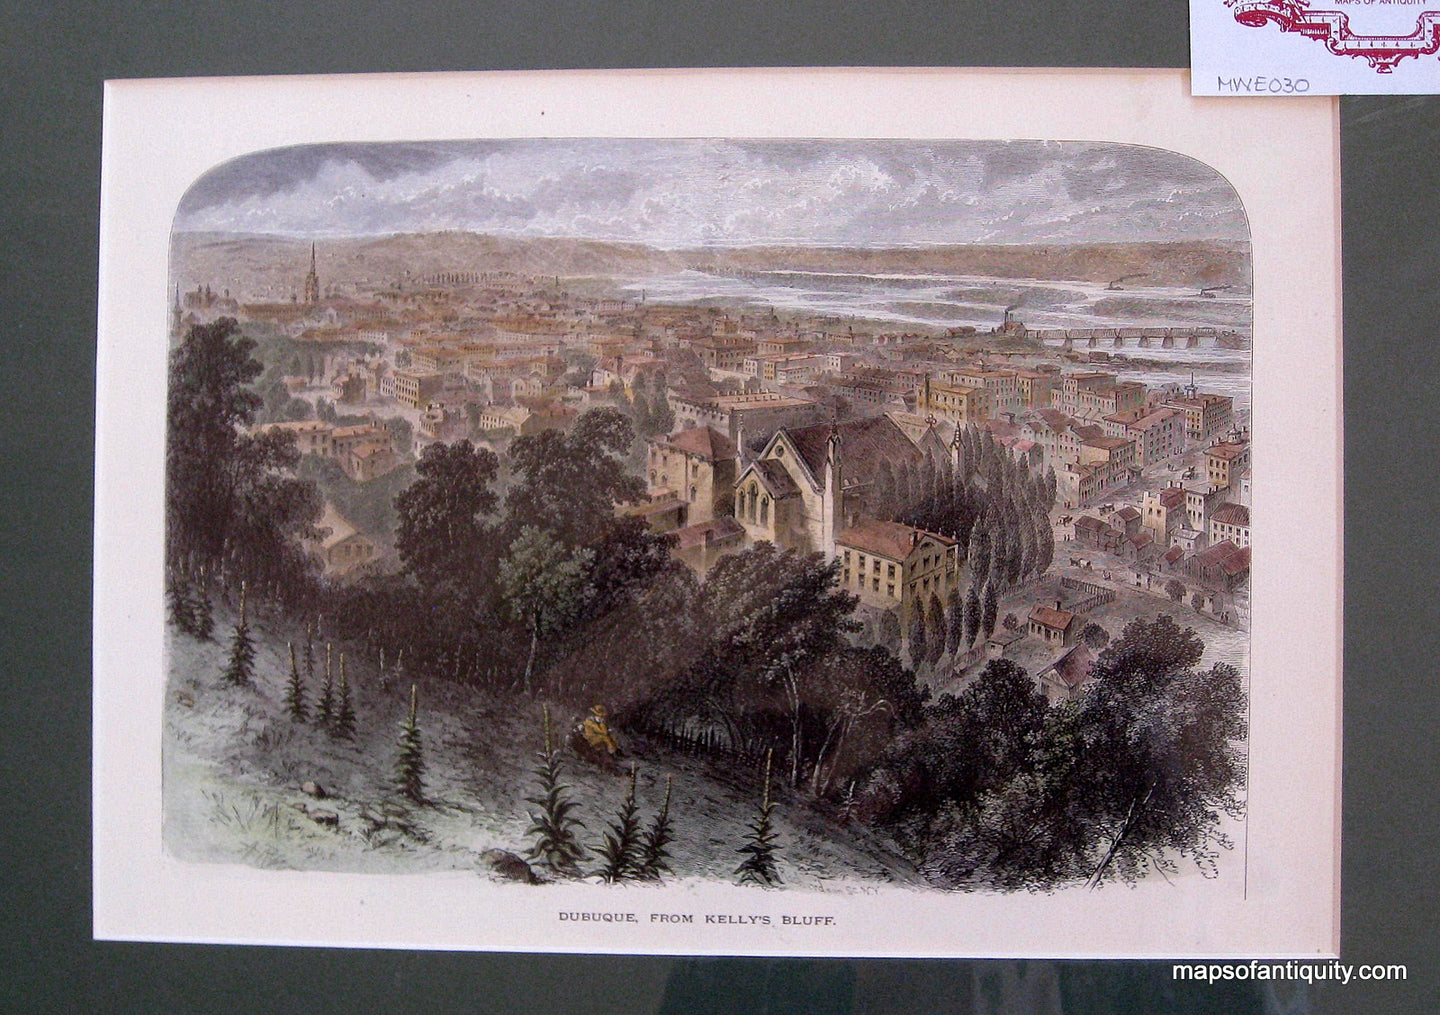 Hand-colored-Woodcut-Dubuque-from-Kelly's-Bluff-United-States-Midwest-1872-D.-Appleton-Maps-Of-Antiquity